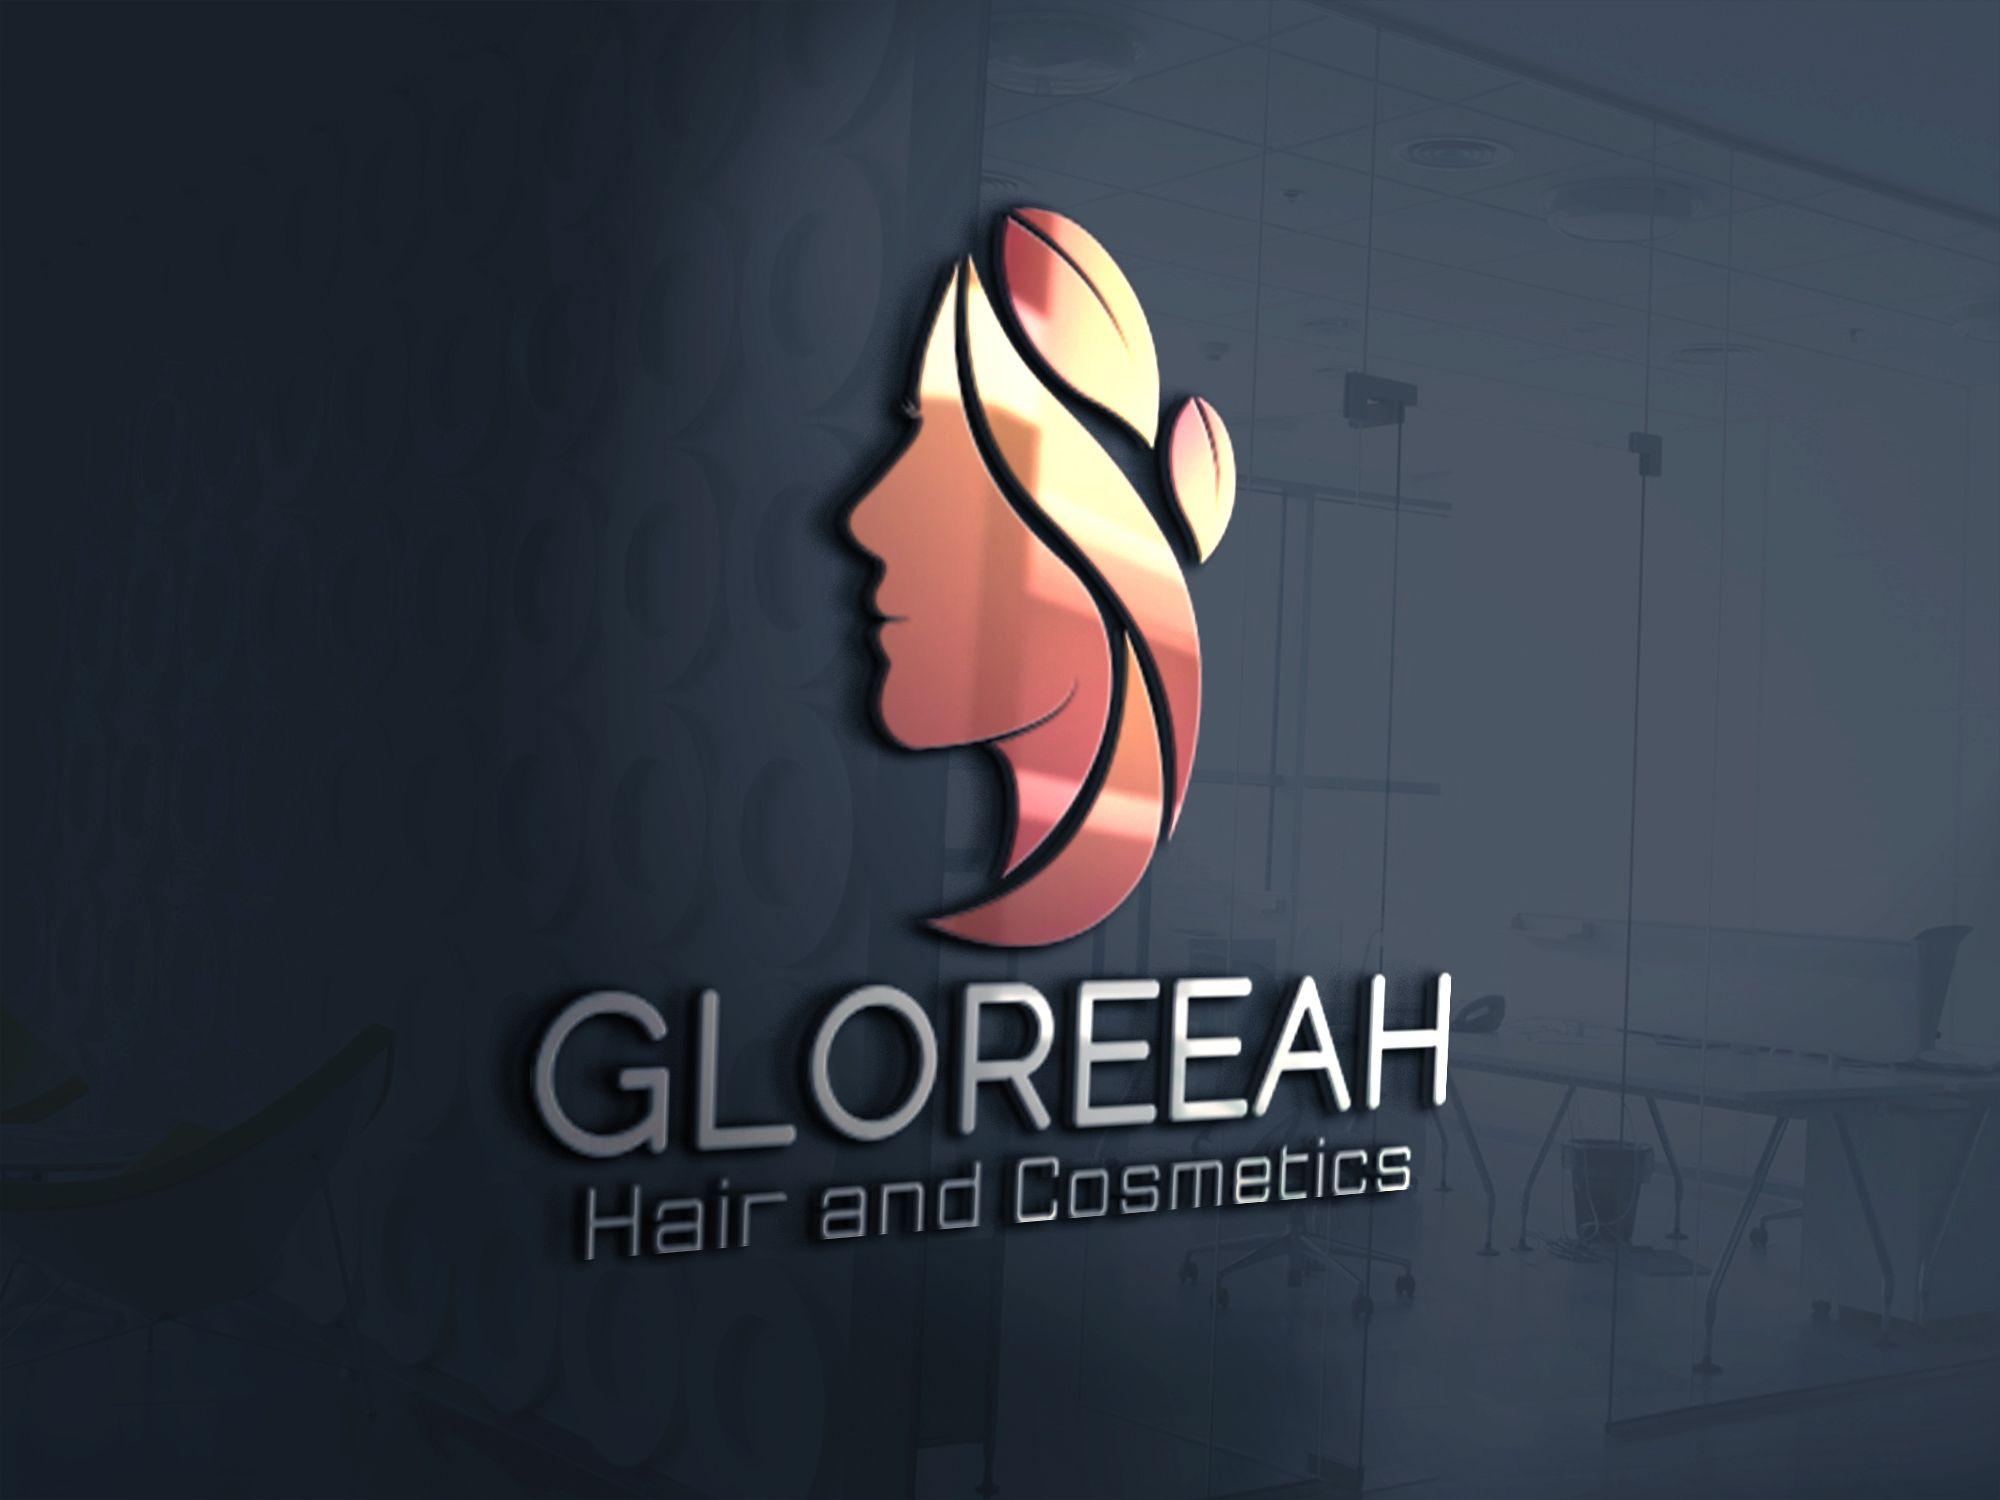 Eye-Catching Logo - I Will Design A Modern Eye Catching Logo For Your Brand. WorkDesk™